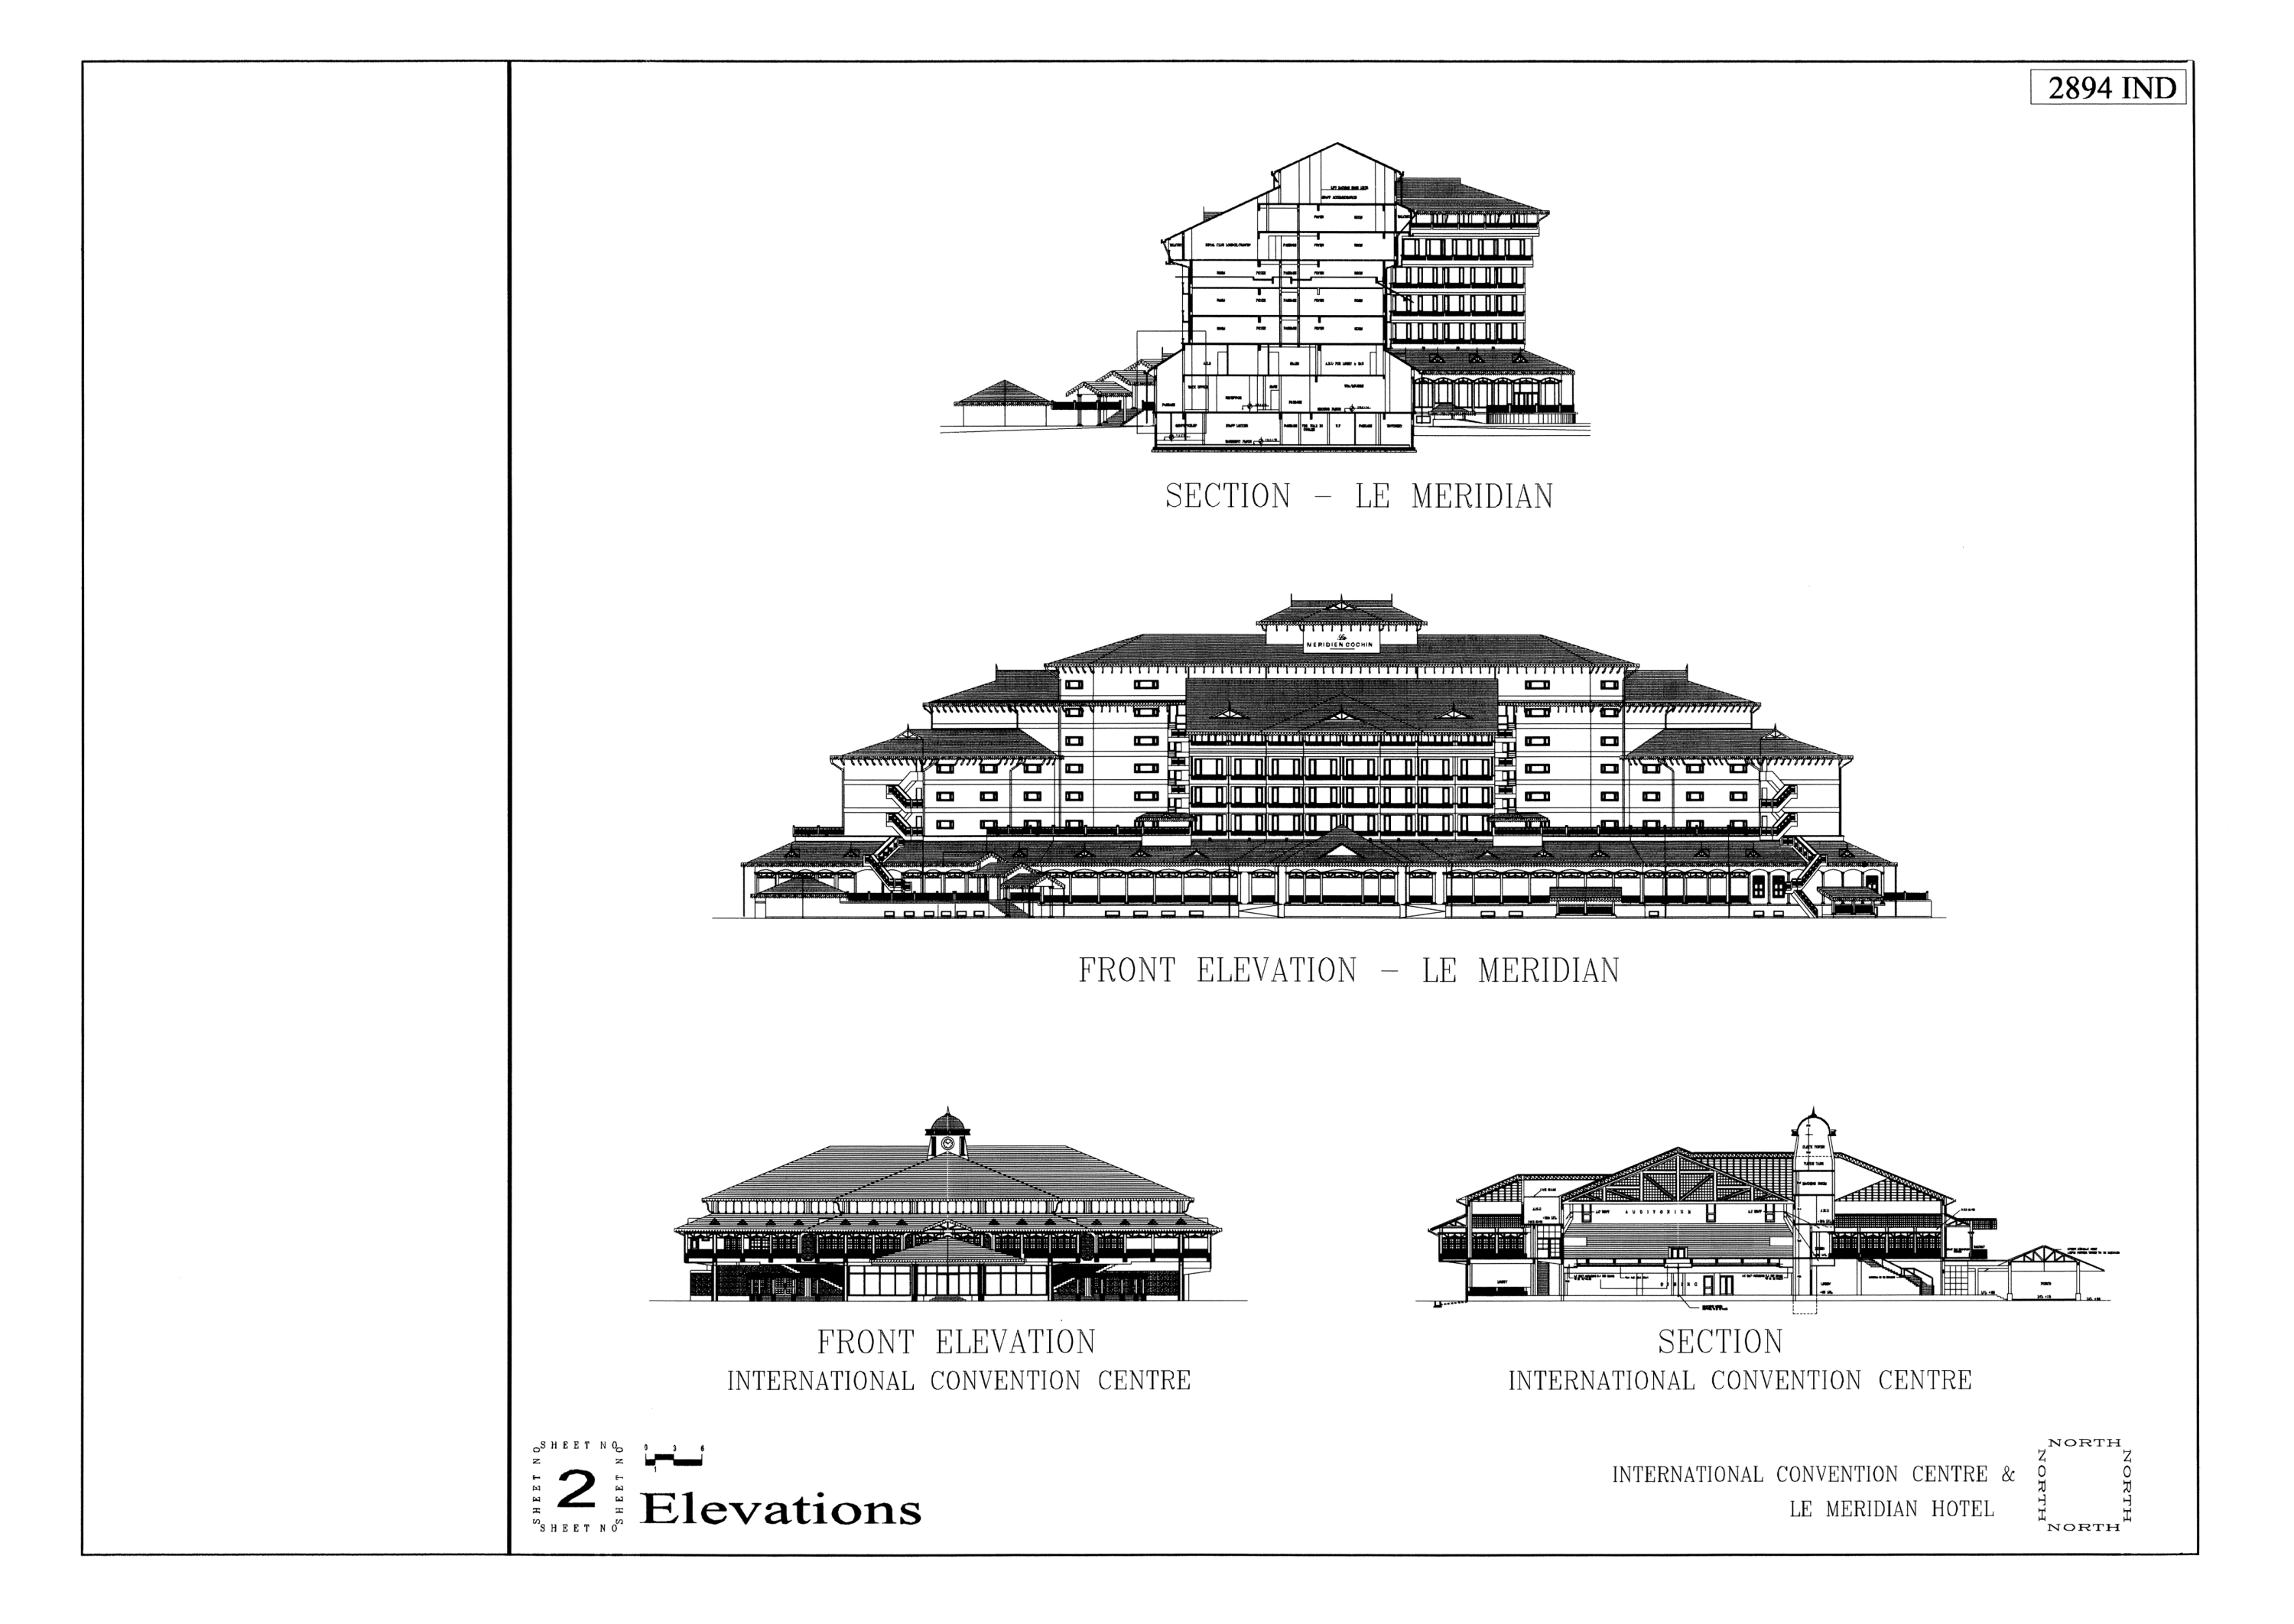 Presentation panel with sections and elevators of the hotel and convention centre